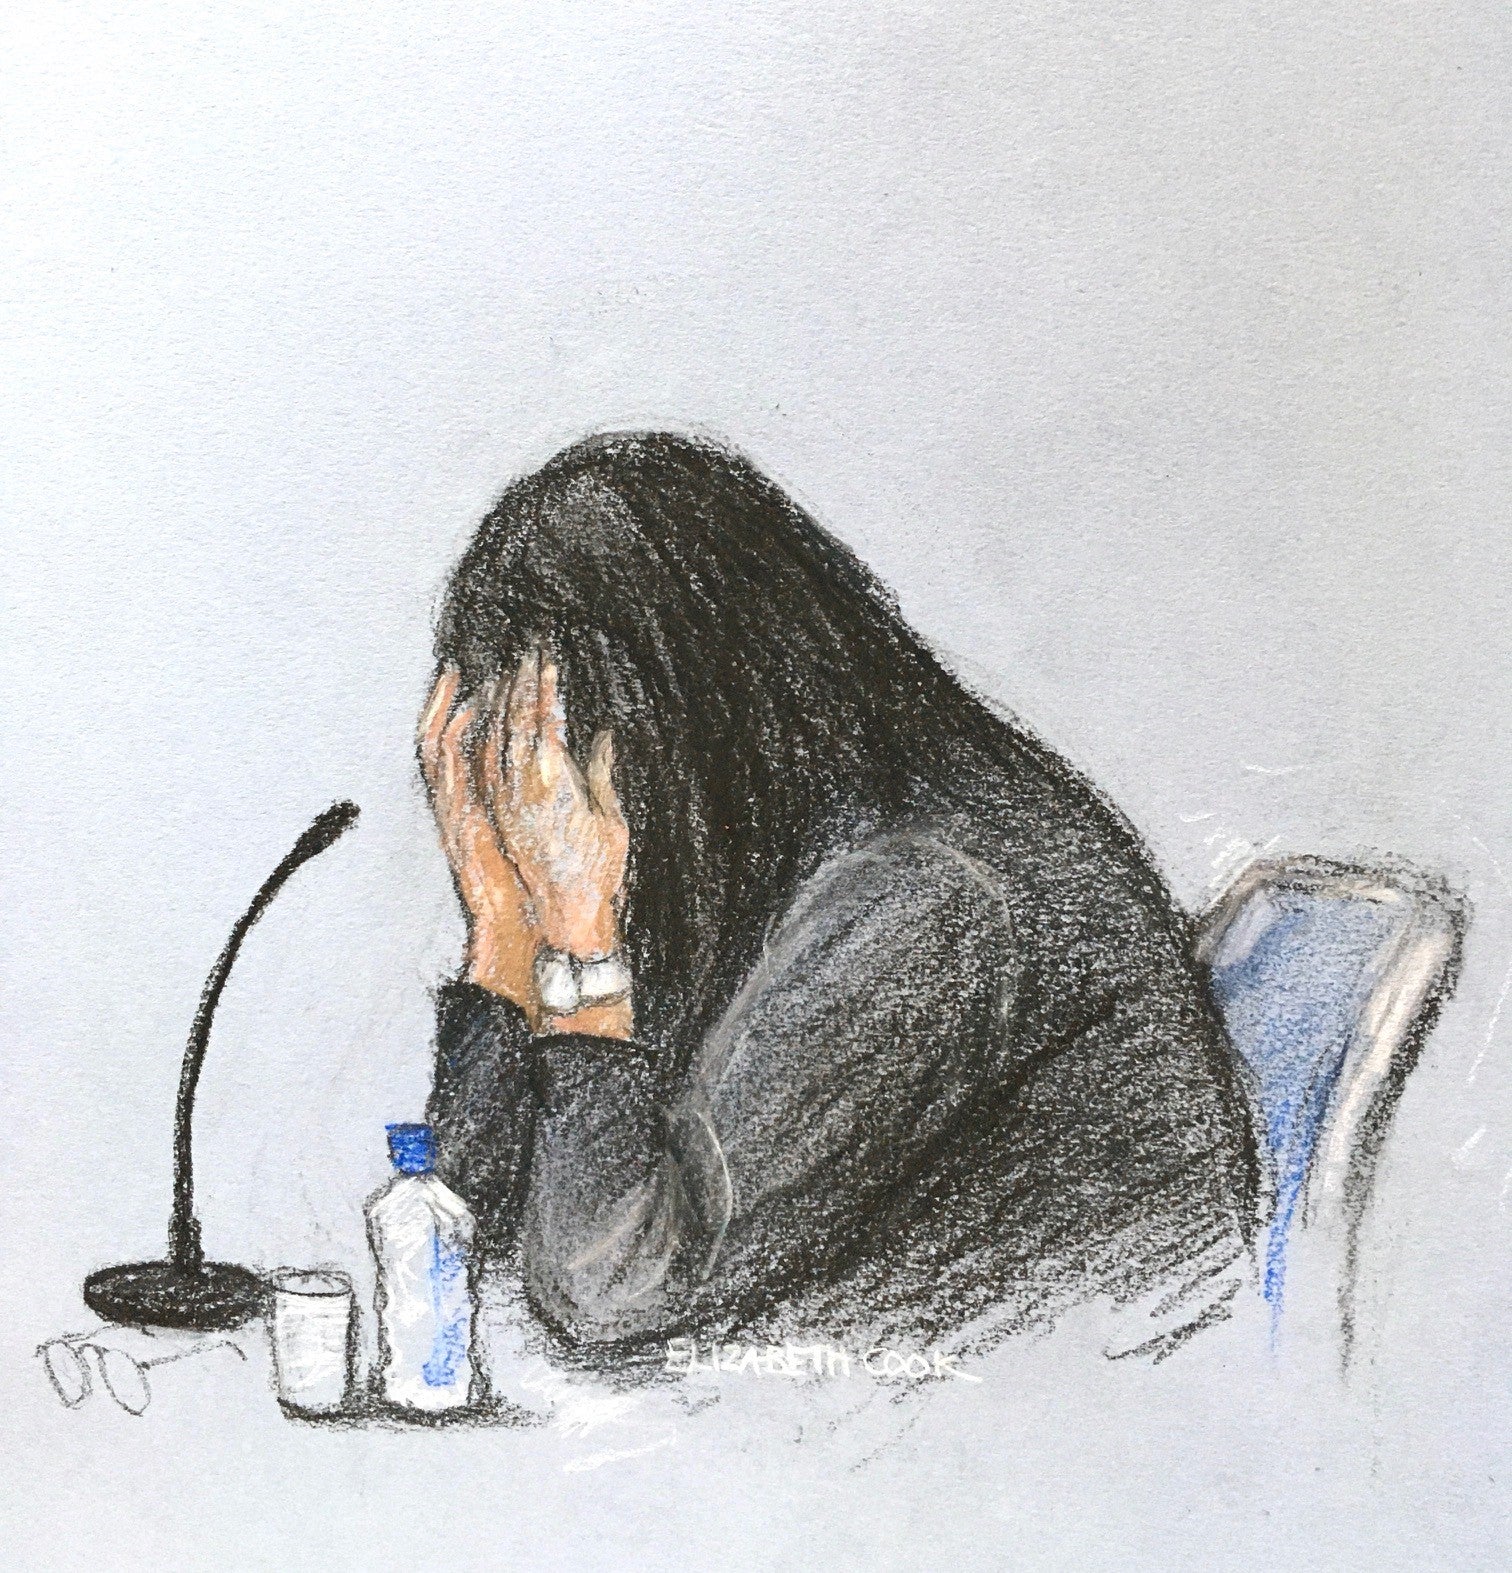 Angharad Williamson giving evidence at Cardiff Crown Court (Elizabeth Cook/PA)